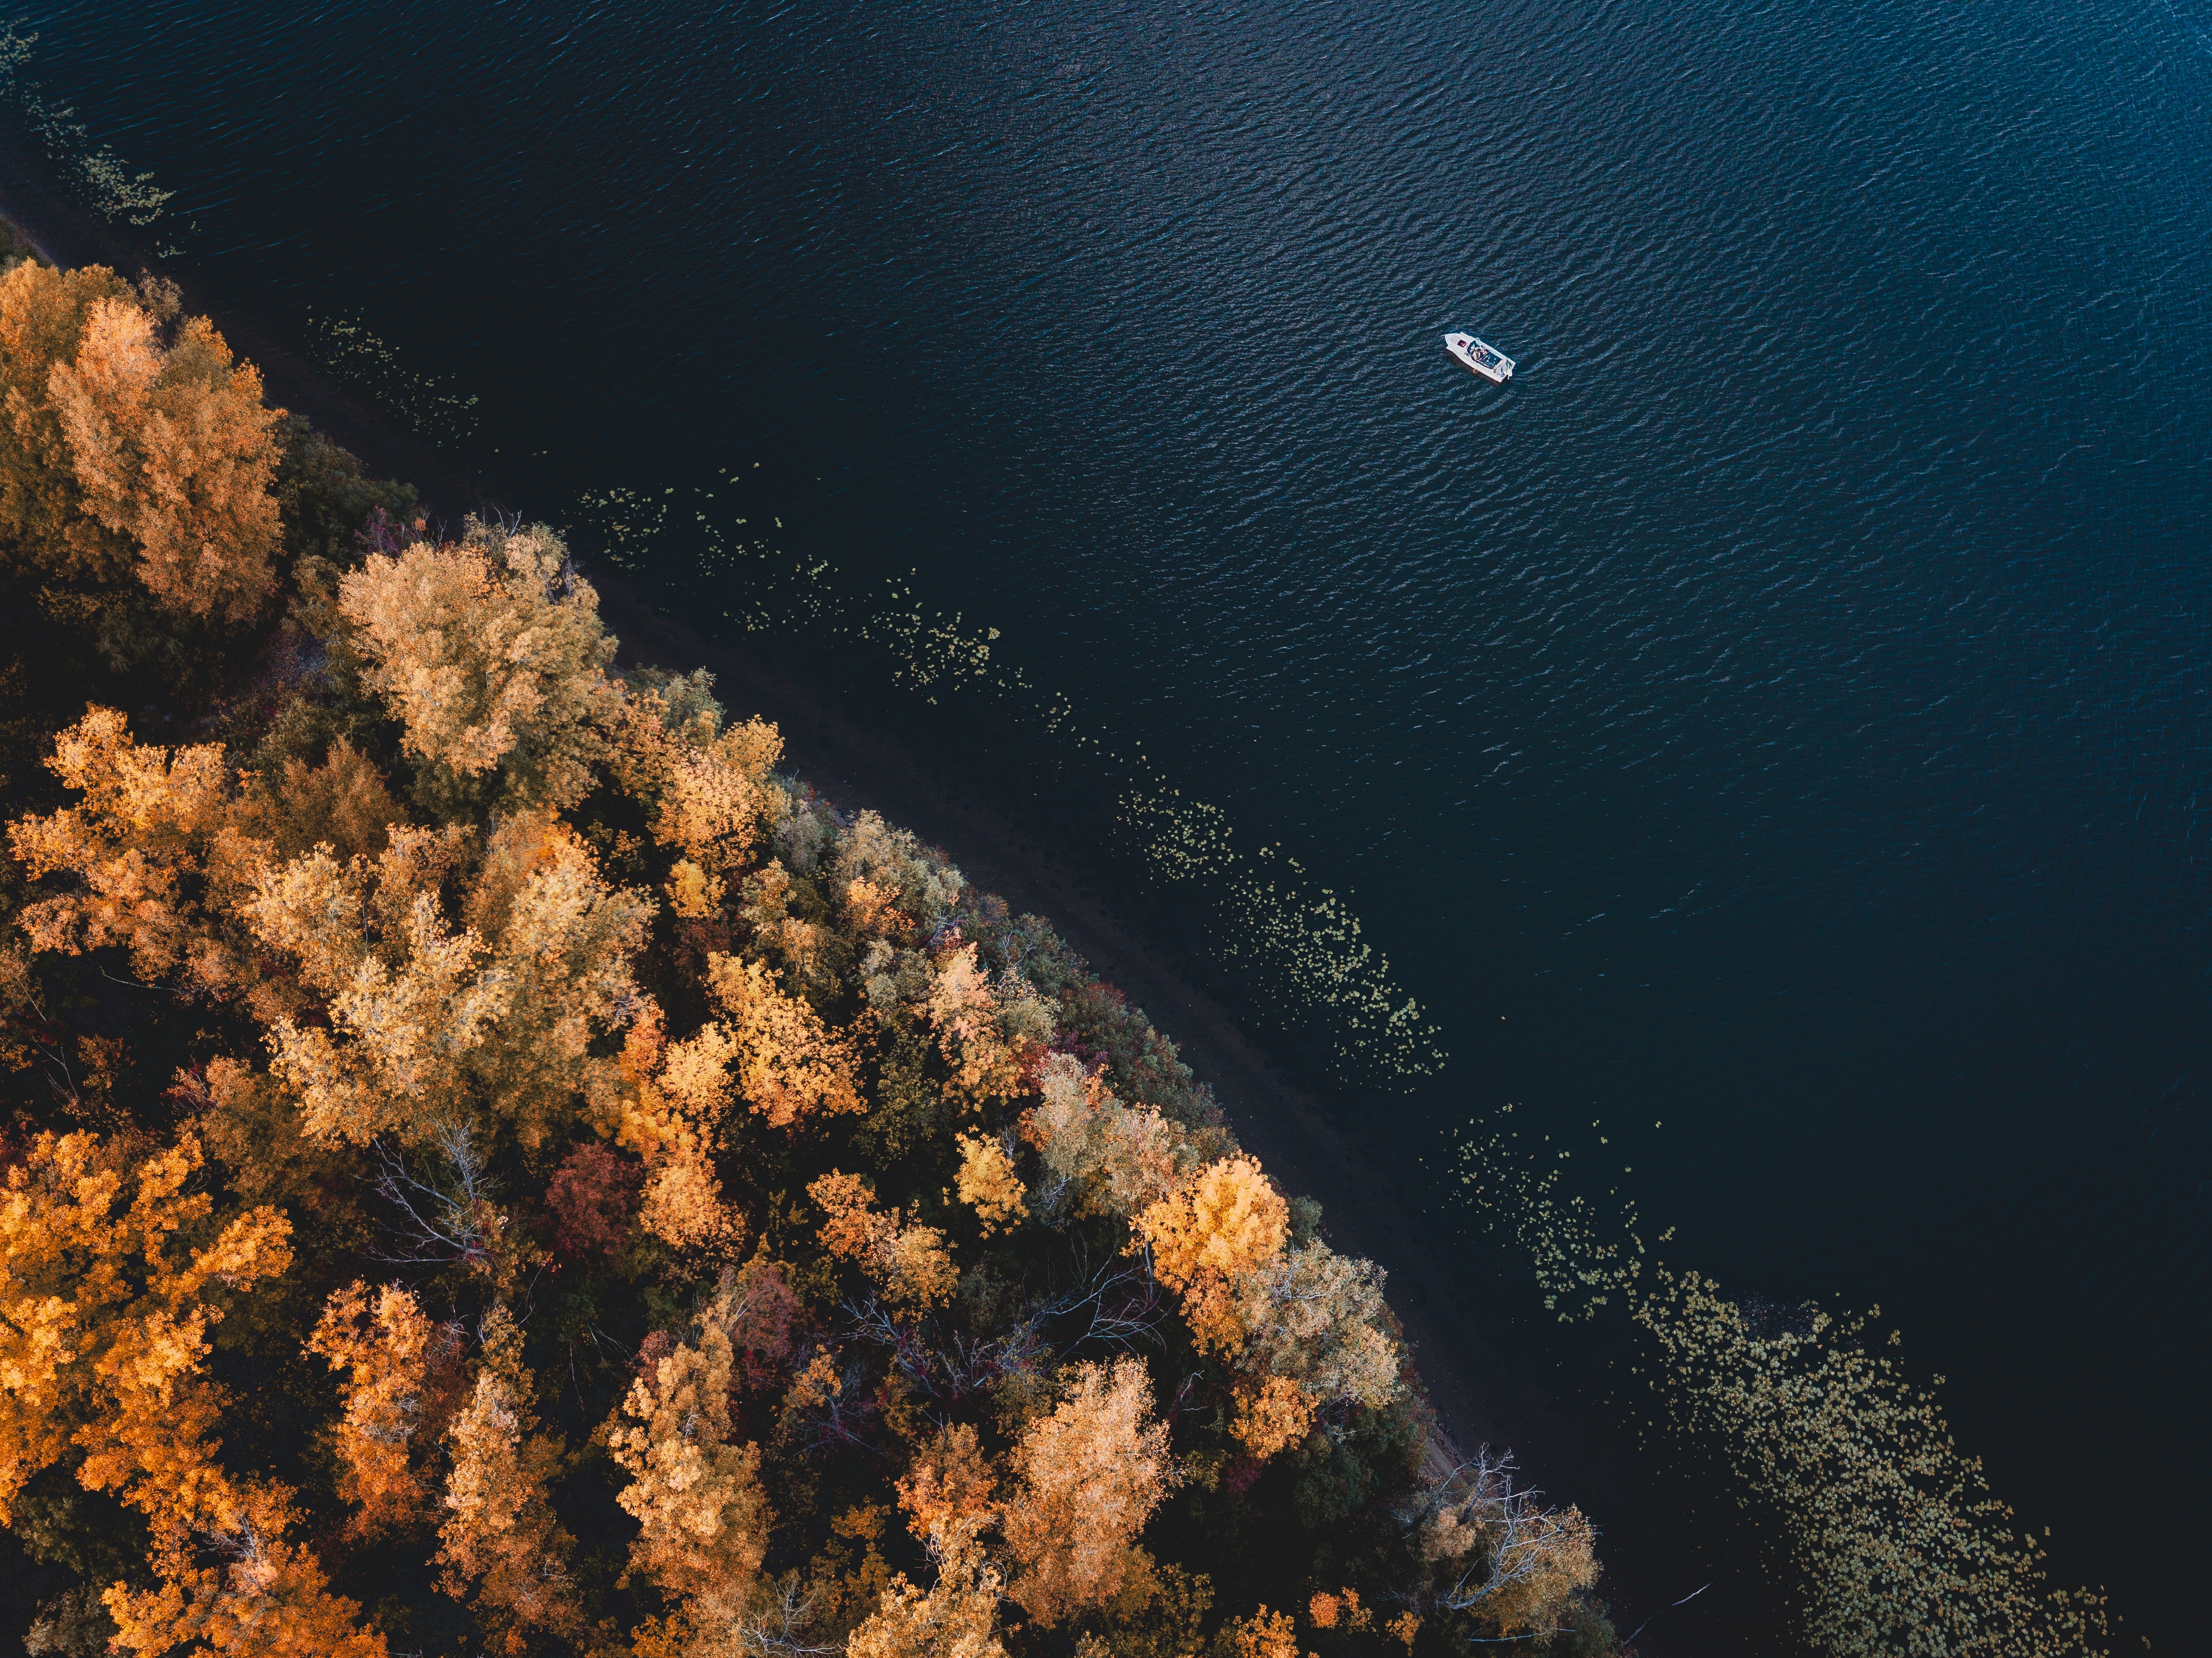 view from above, nature, trees, coast, boat Desktop home screen Wallpaper